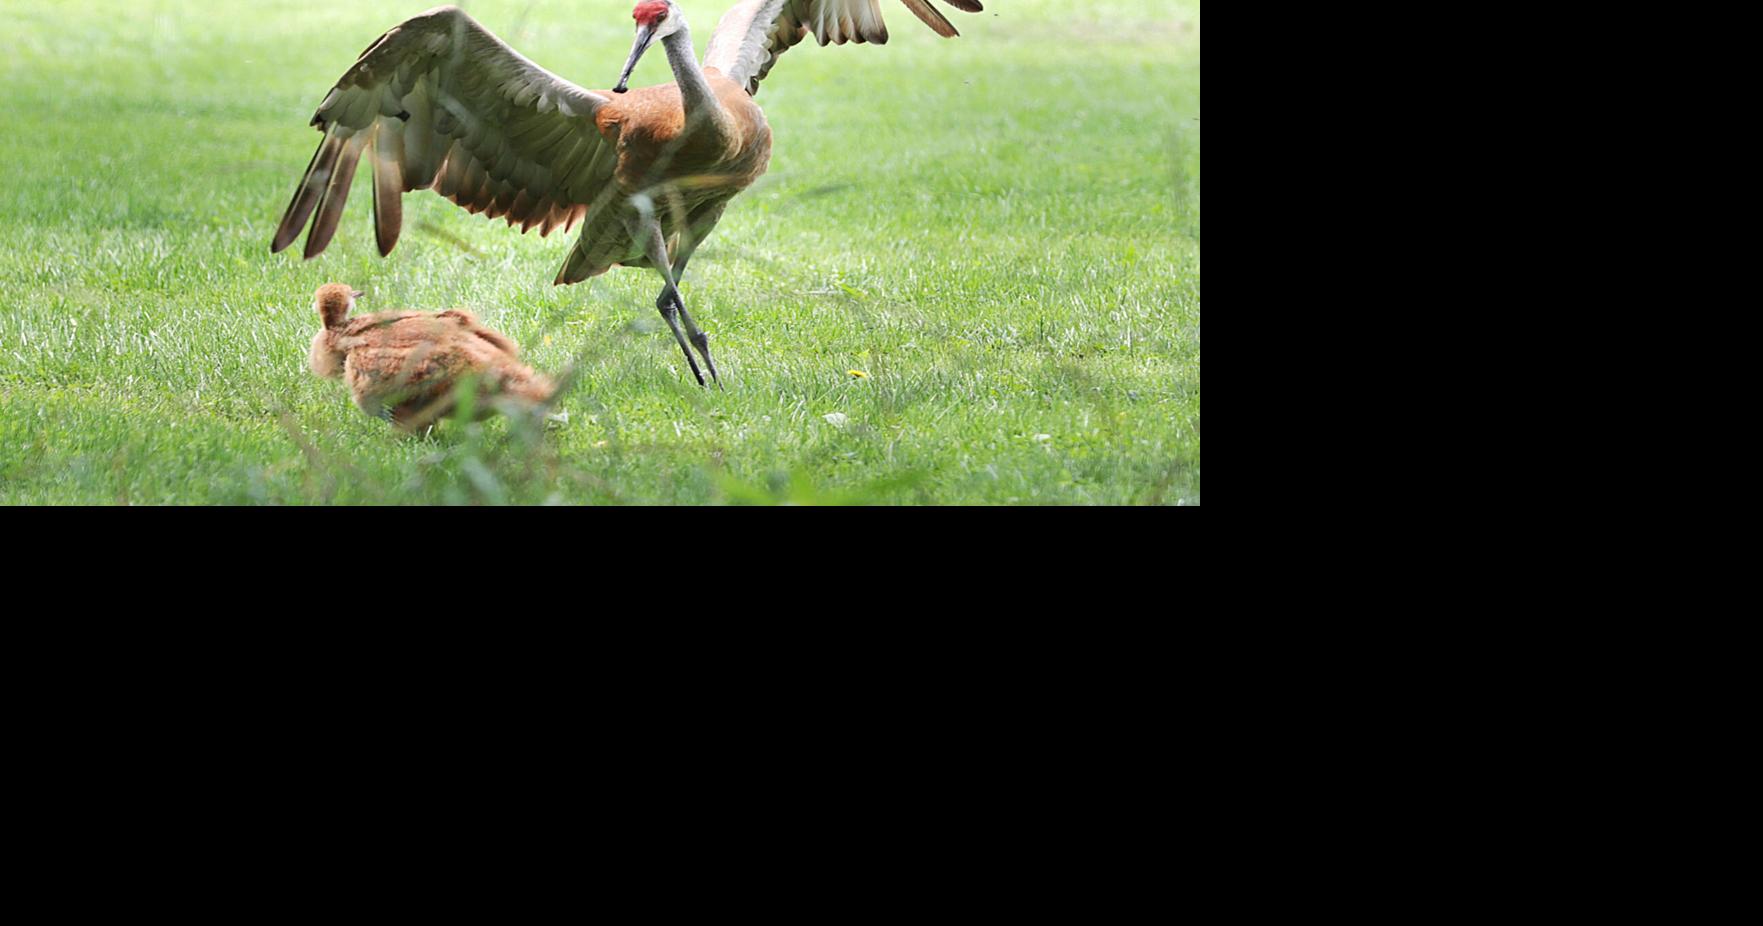 After a slow start, sandhill crane released into the wild